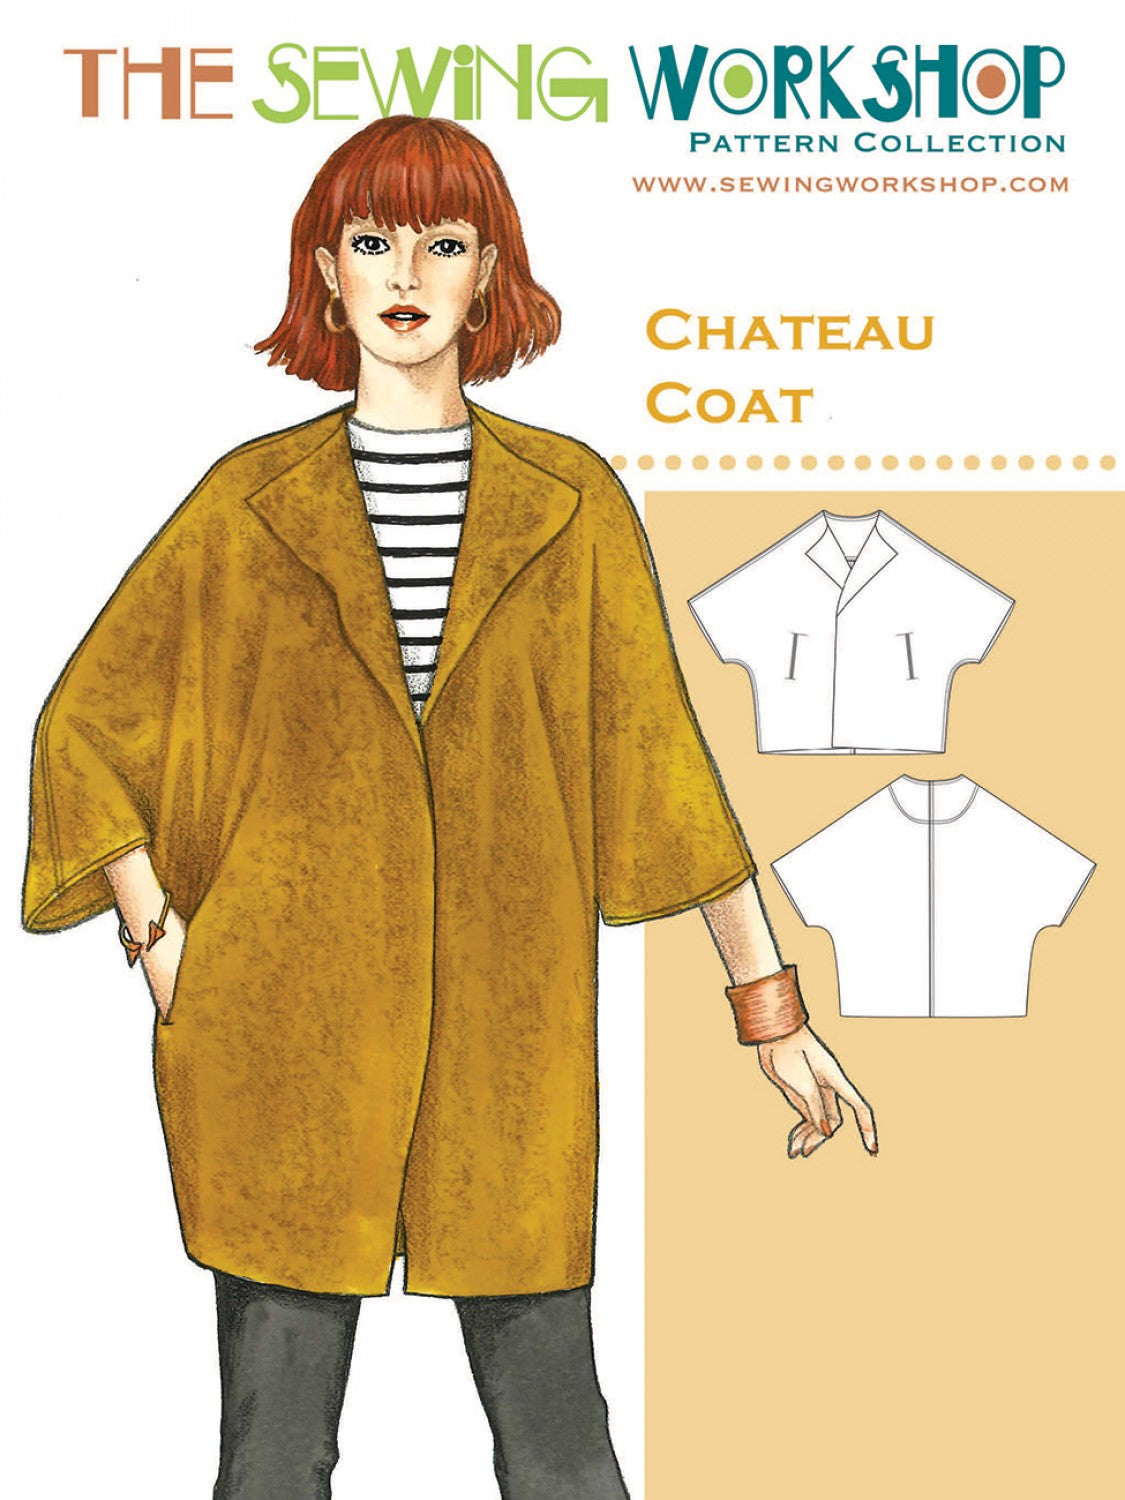 "Coat Loose-fitting, open-front coat with dolman sleeves and front slit pockets. Raw edges, lap seam construction.  Suggested Fabrics Medium to heavy-weight no-fray fabrics such as wool melton, felled wool, neoprene, scuba, suede or faux suede. Instructions included for knit binding and patch pockets when using fabrics that fray.